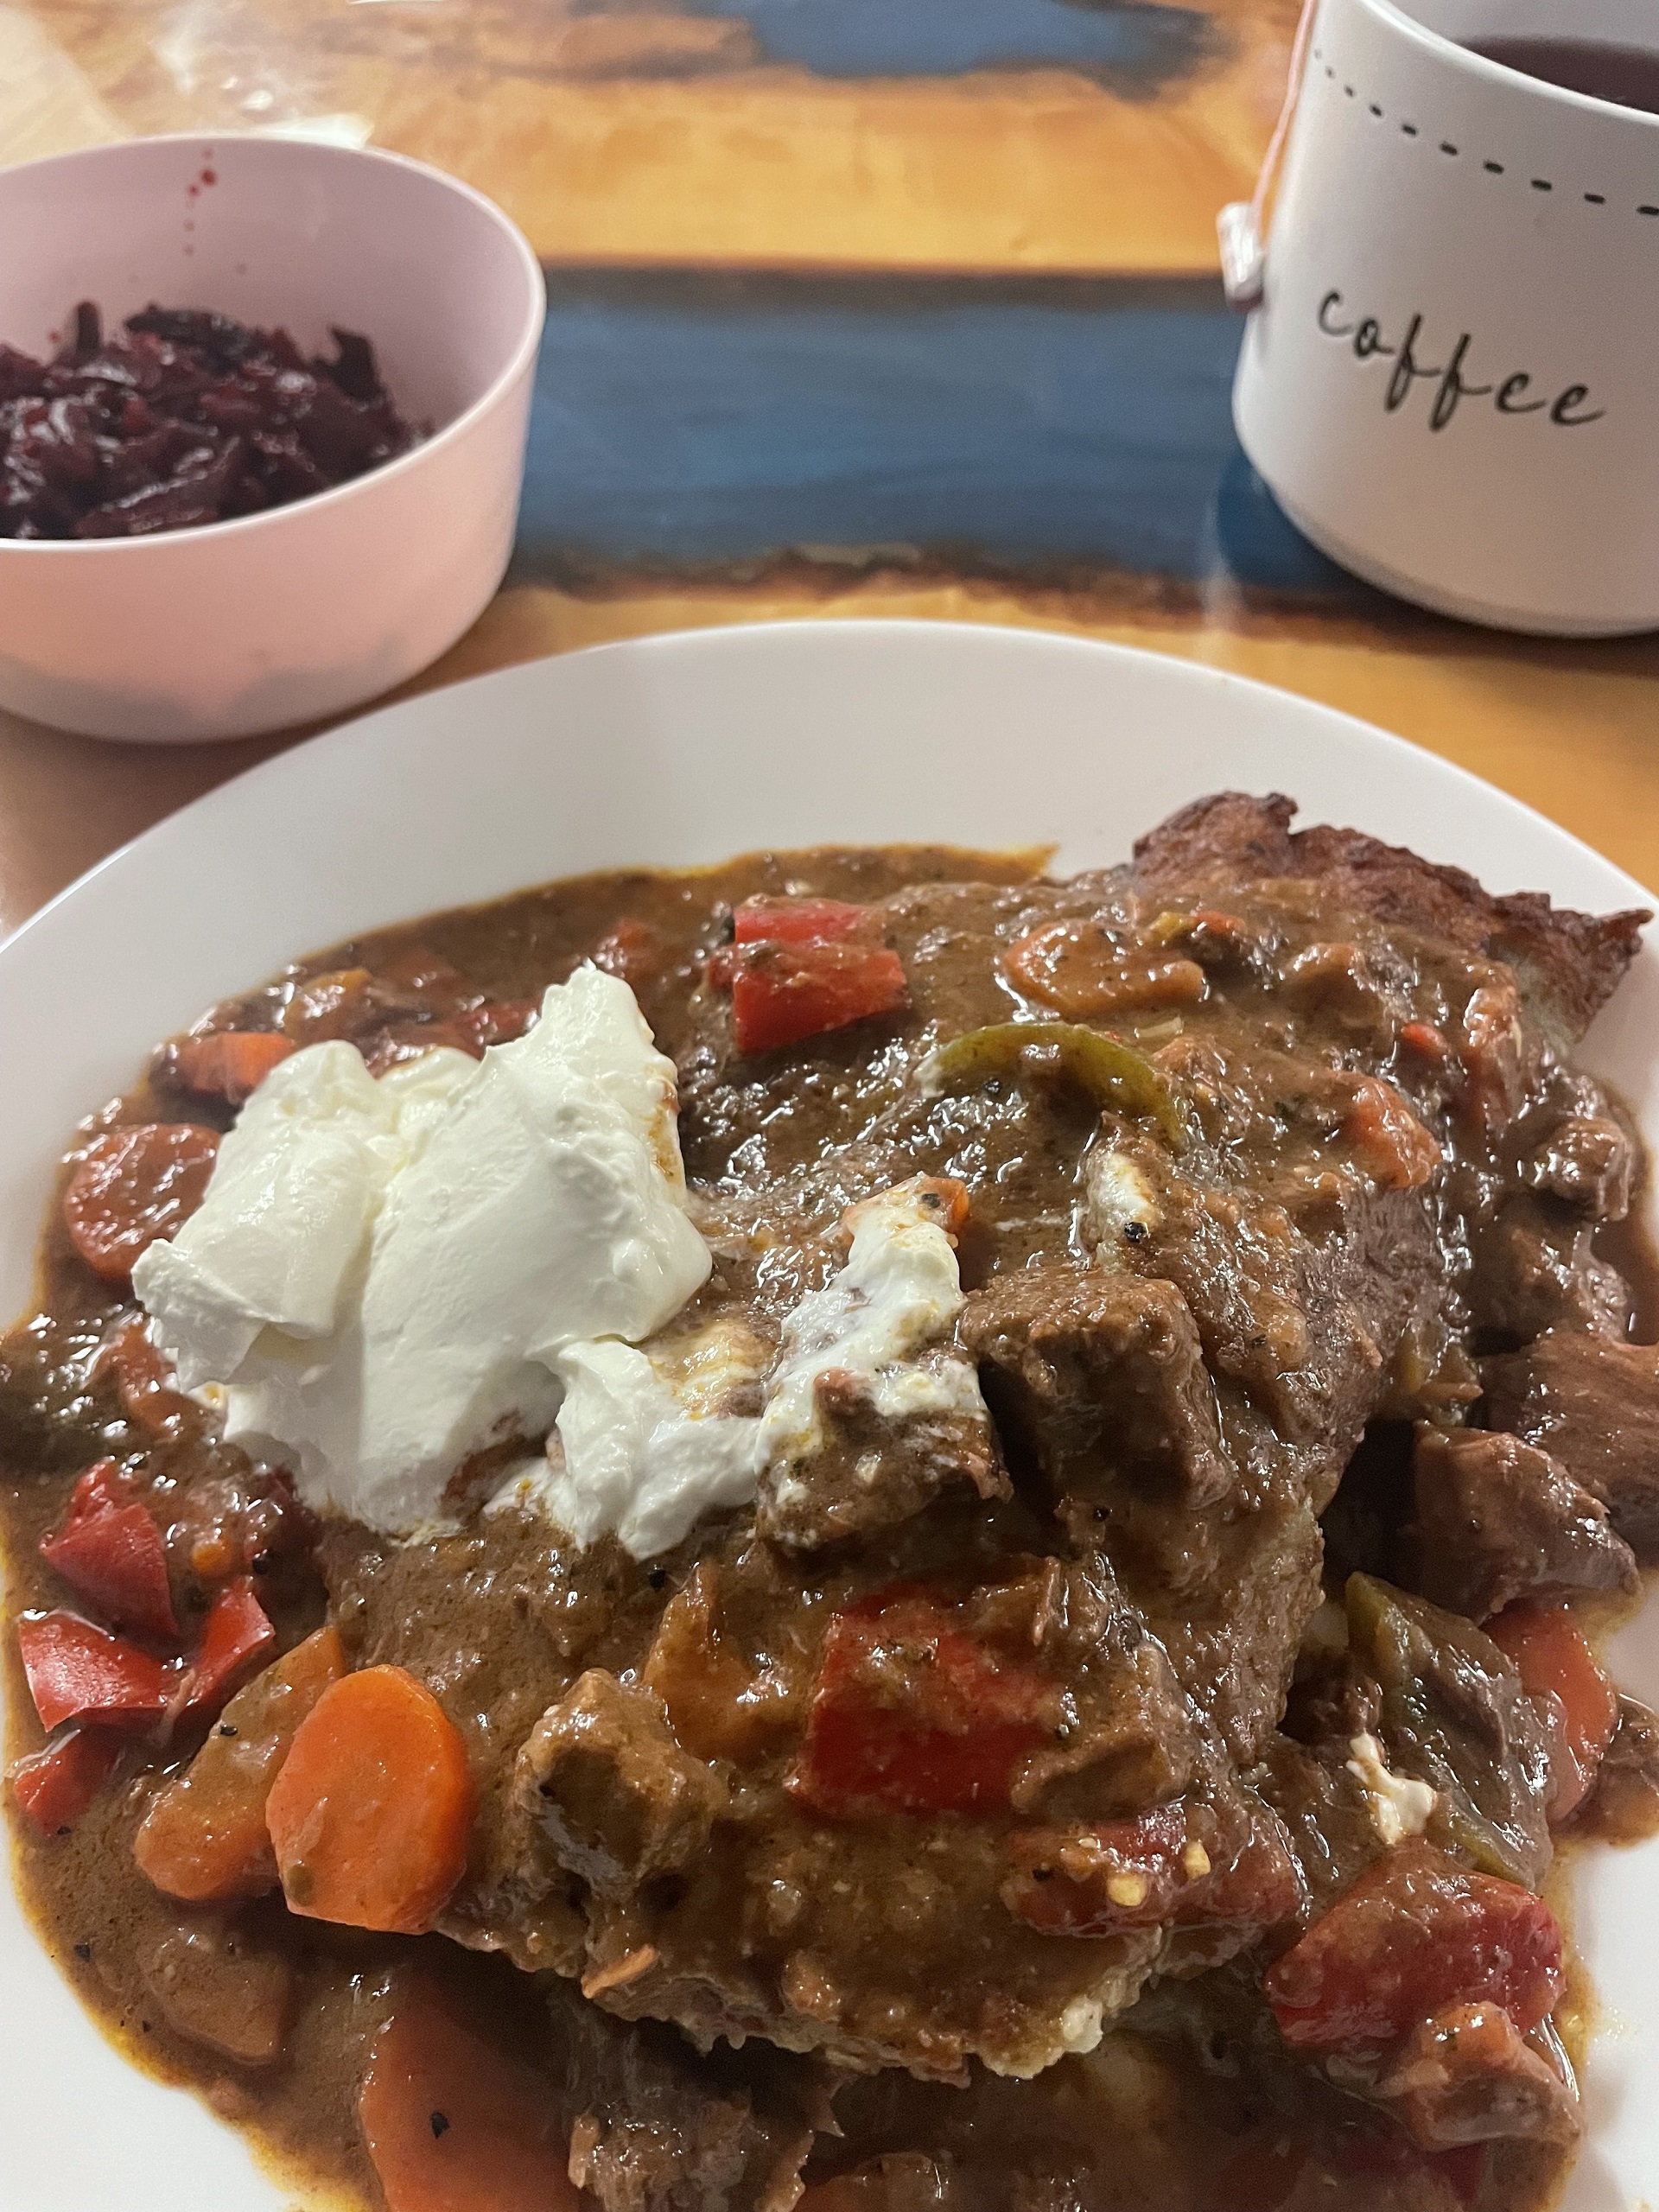 Kat's Goulash Beef Bleenie with tender savory beef chunks and vegetables such as sliced carrots, pieces of red paprika, served in and on an XL bleenie folded with beef goulash gravy and a dollop of sour cream on a white plate with a side of Slavic veggie beet or red cabbage salad on white dishes.